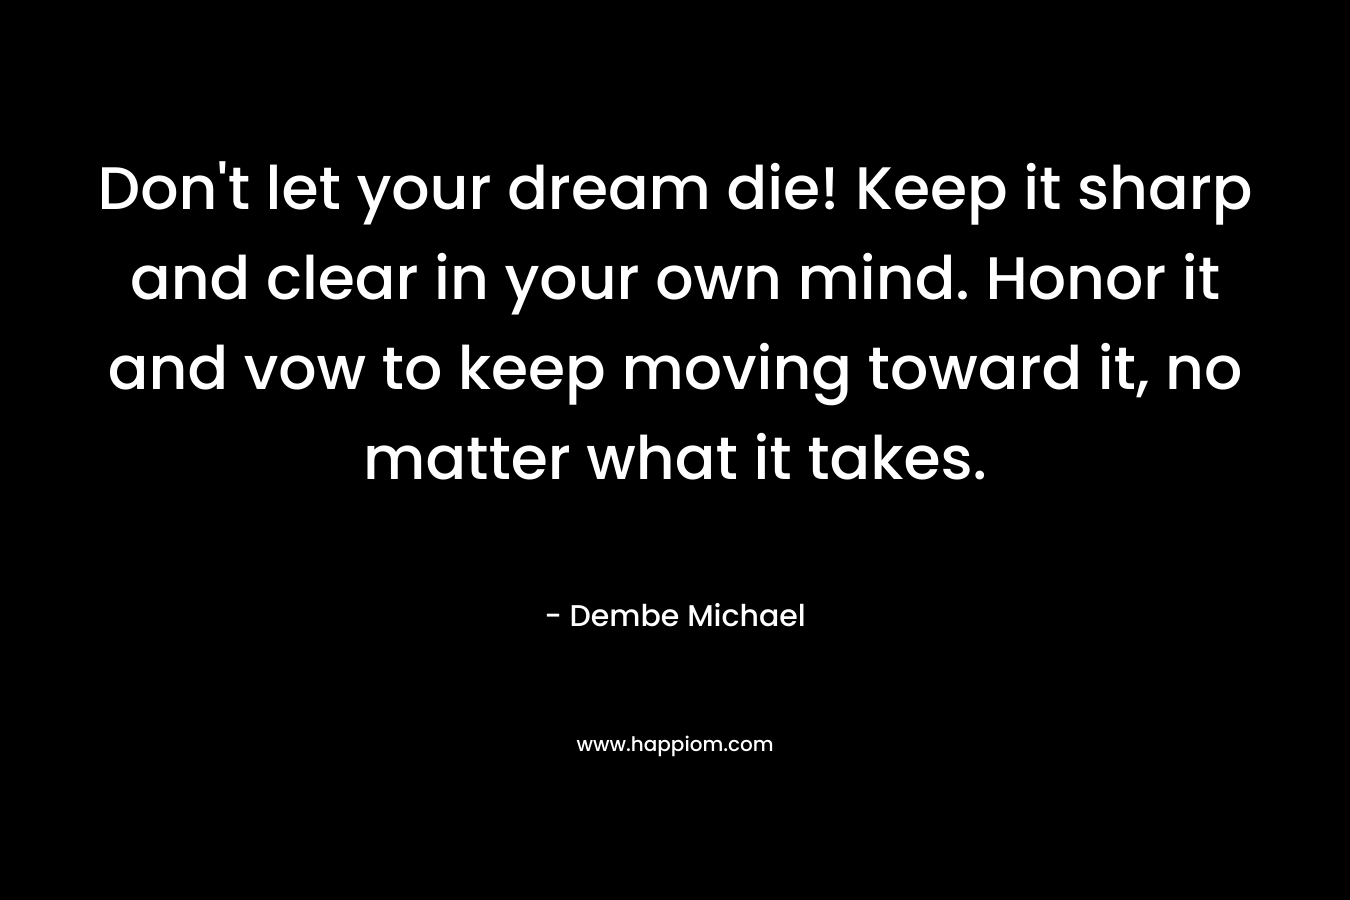 Don't let your dream die! Keep it sharp and clear in your own mind. Honor it and vow to keep moving toward it, no matter what it takes.